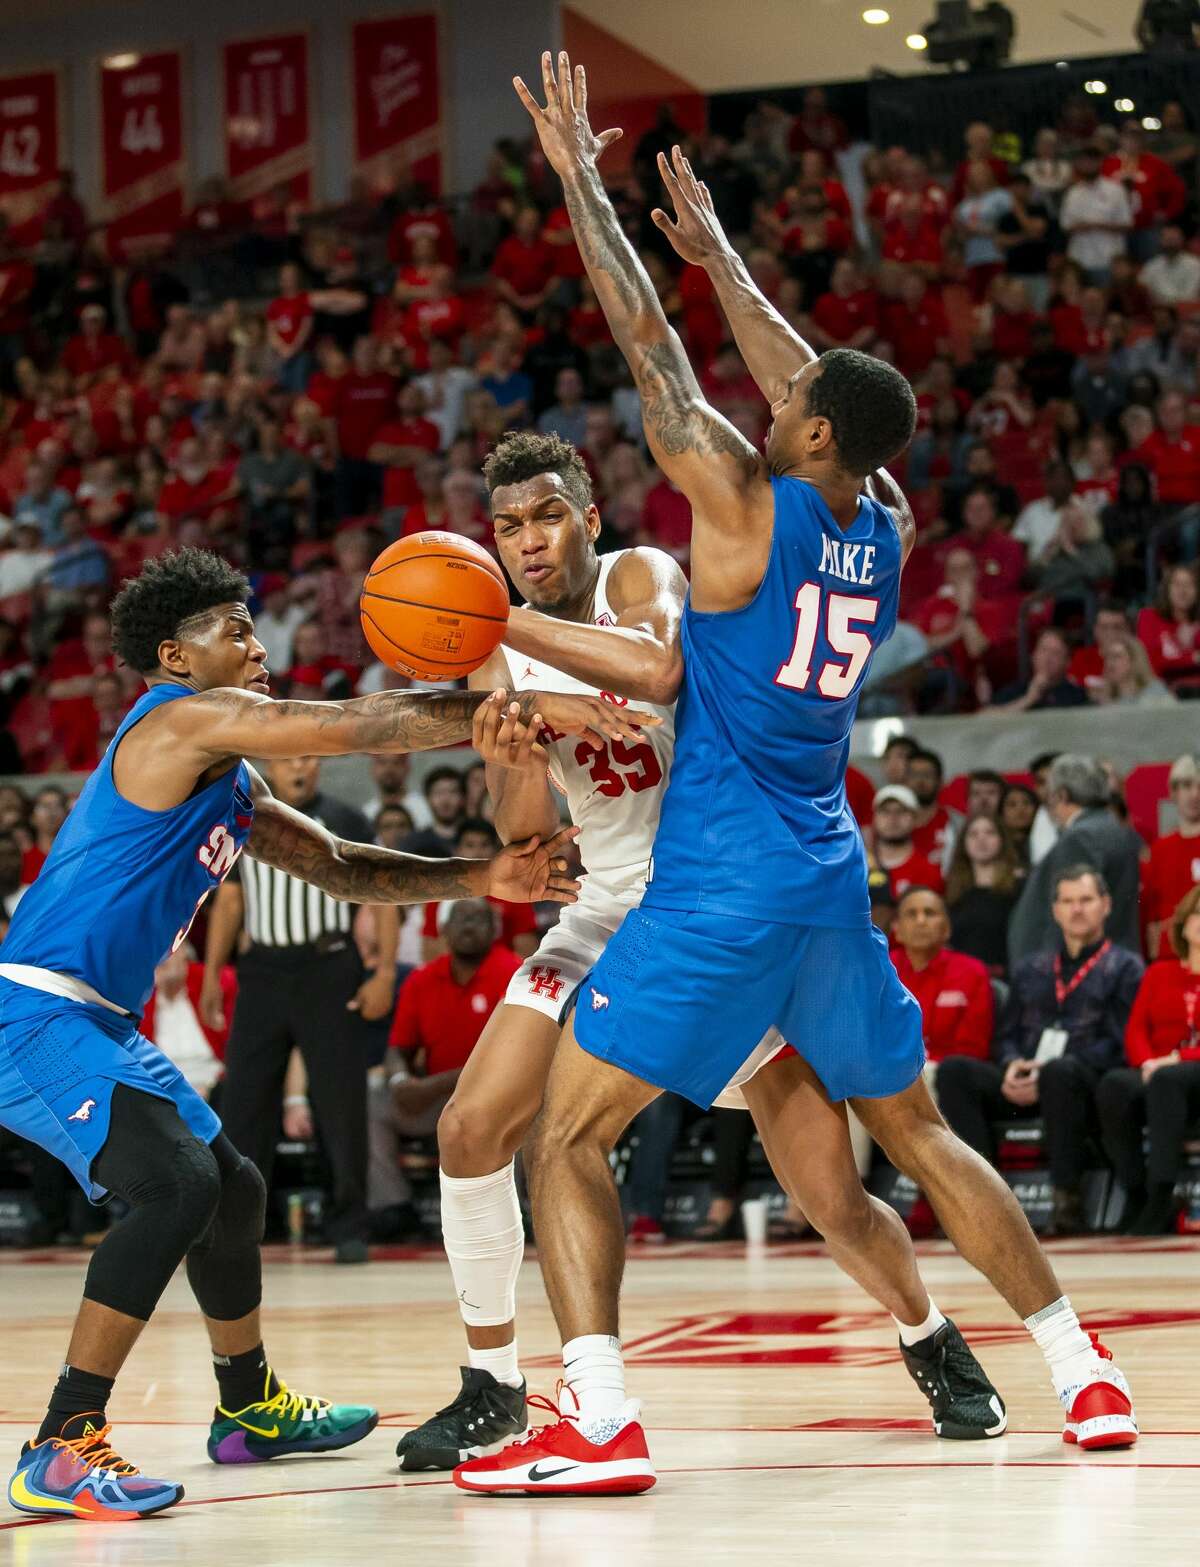 Houston Cougars forward Fabian White Jr. (35) tries to shoot through the defense of Southern Methodist Mustangs guard Kendric Davis (3) and forward Isiaha Mike (15) during the second half of the Cougars' game against the Mustangs at the Fertitta Center in Houston, Wednesday, Jan. 15, 2020.